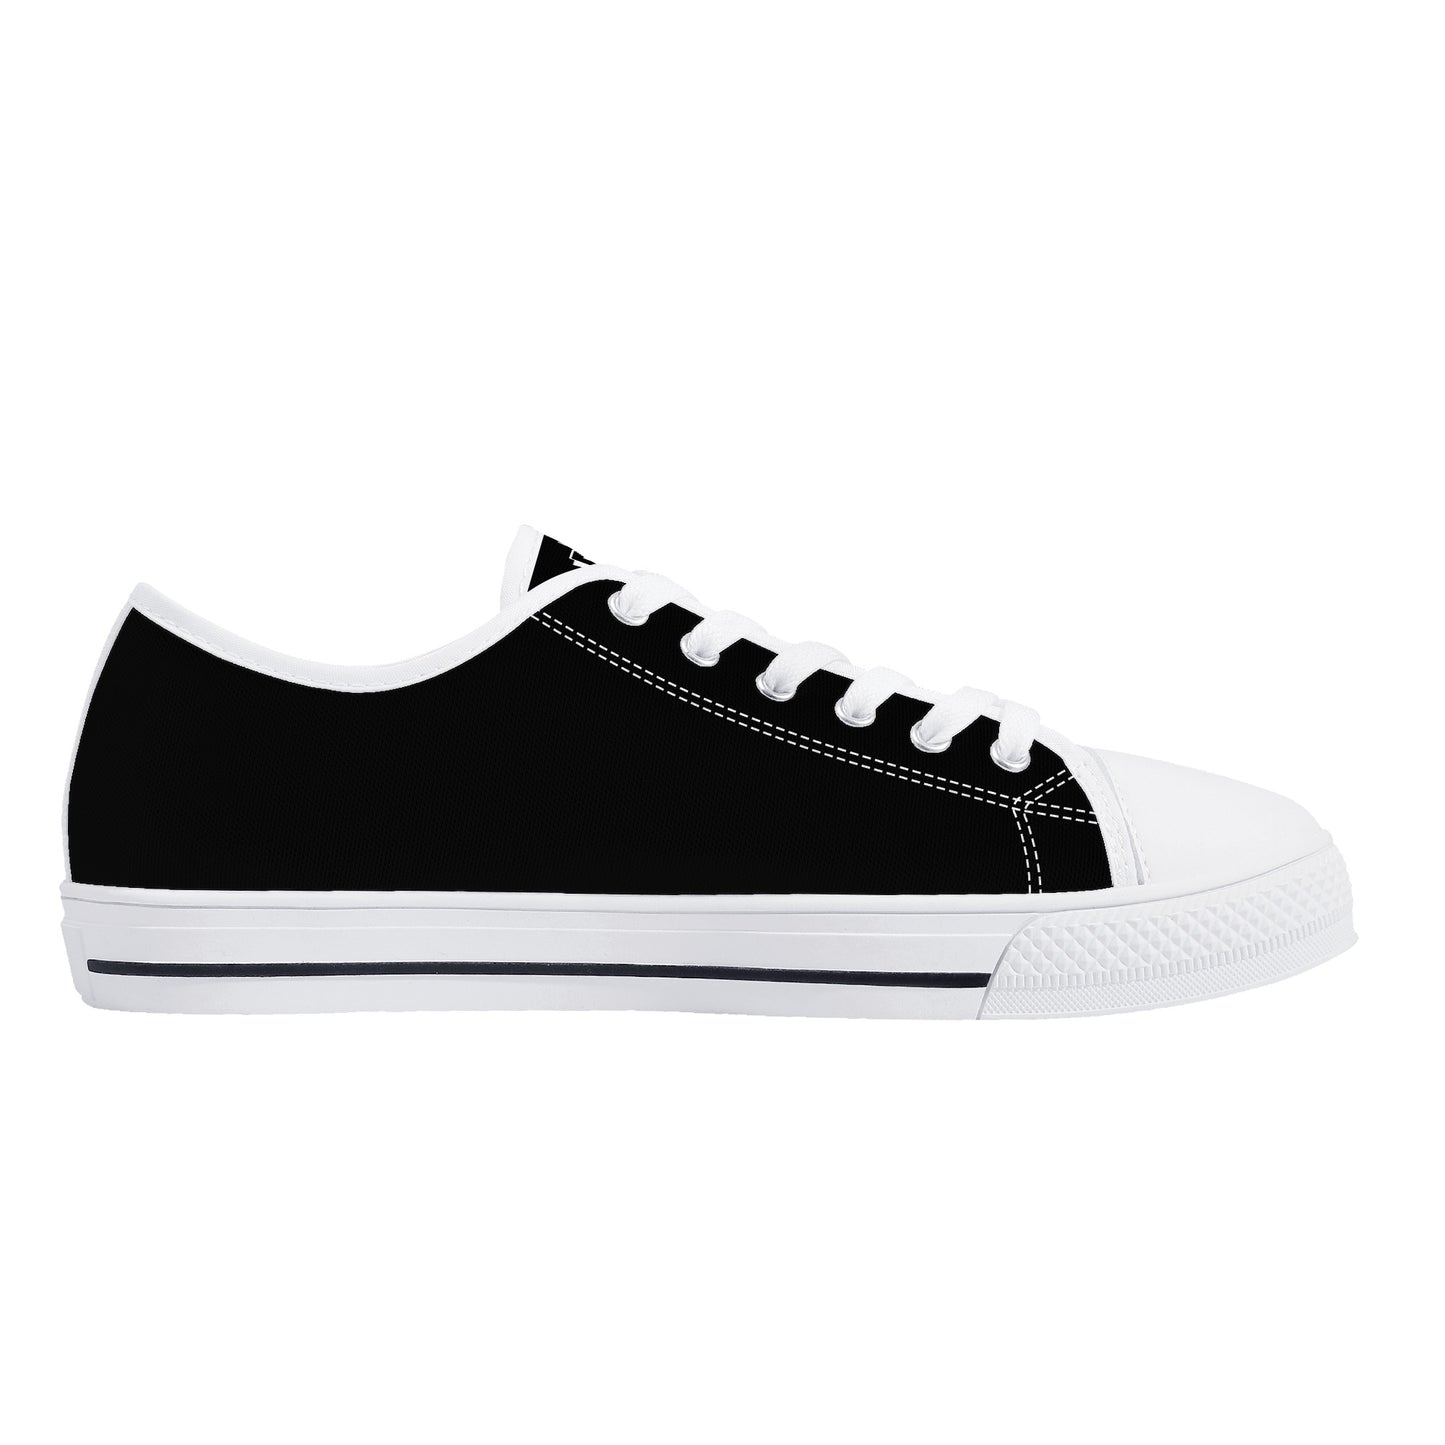 DJMD Womens Low Top Canvas Shoes - Customized Tongue